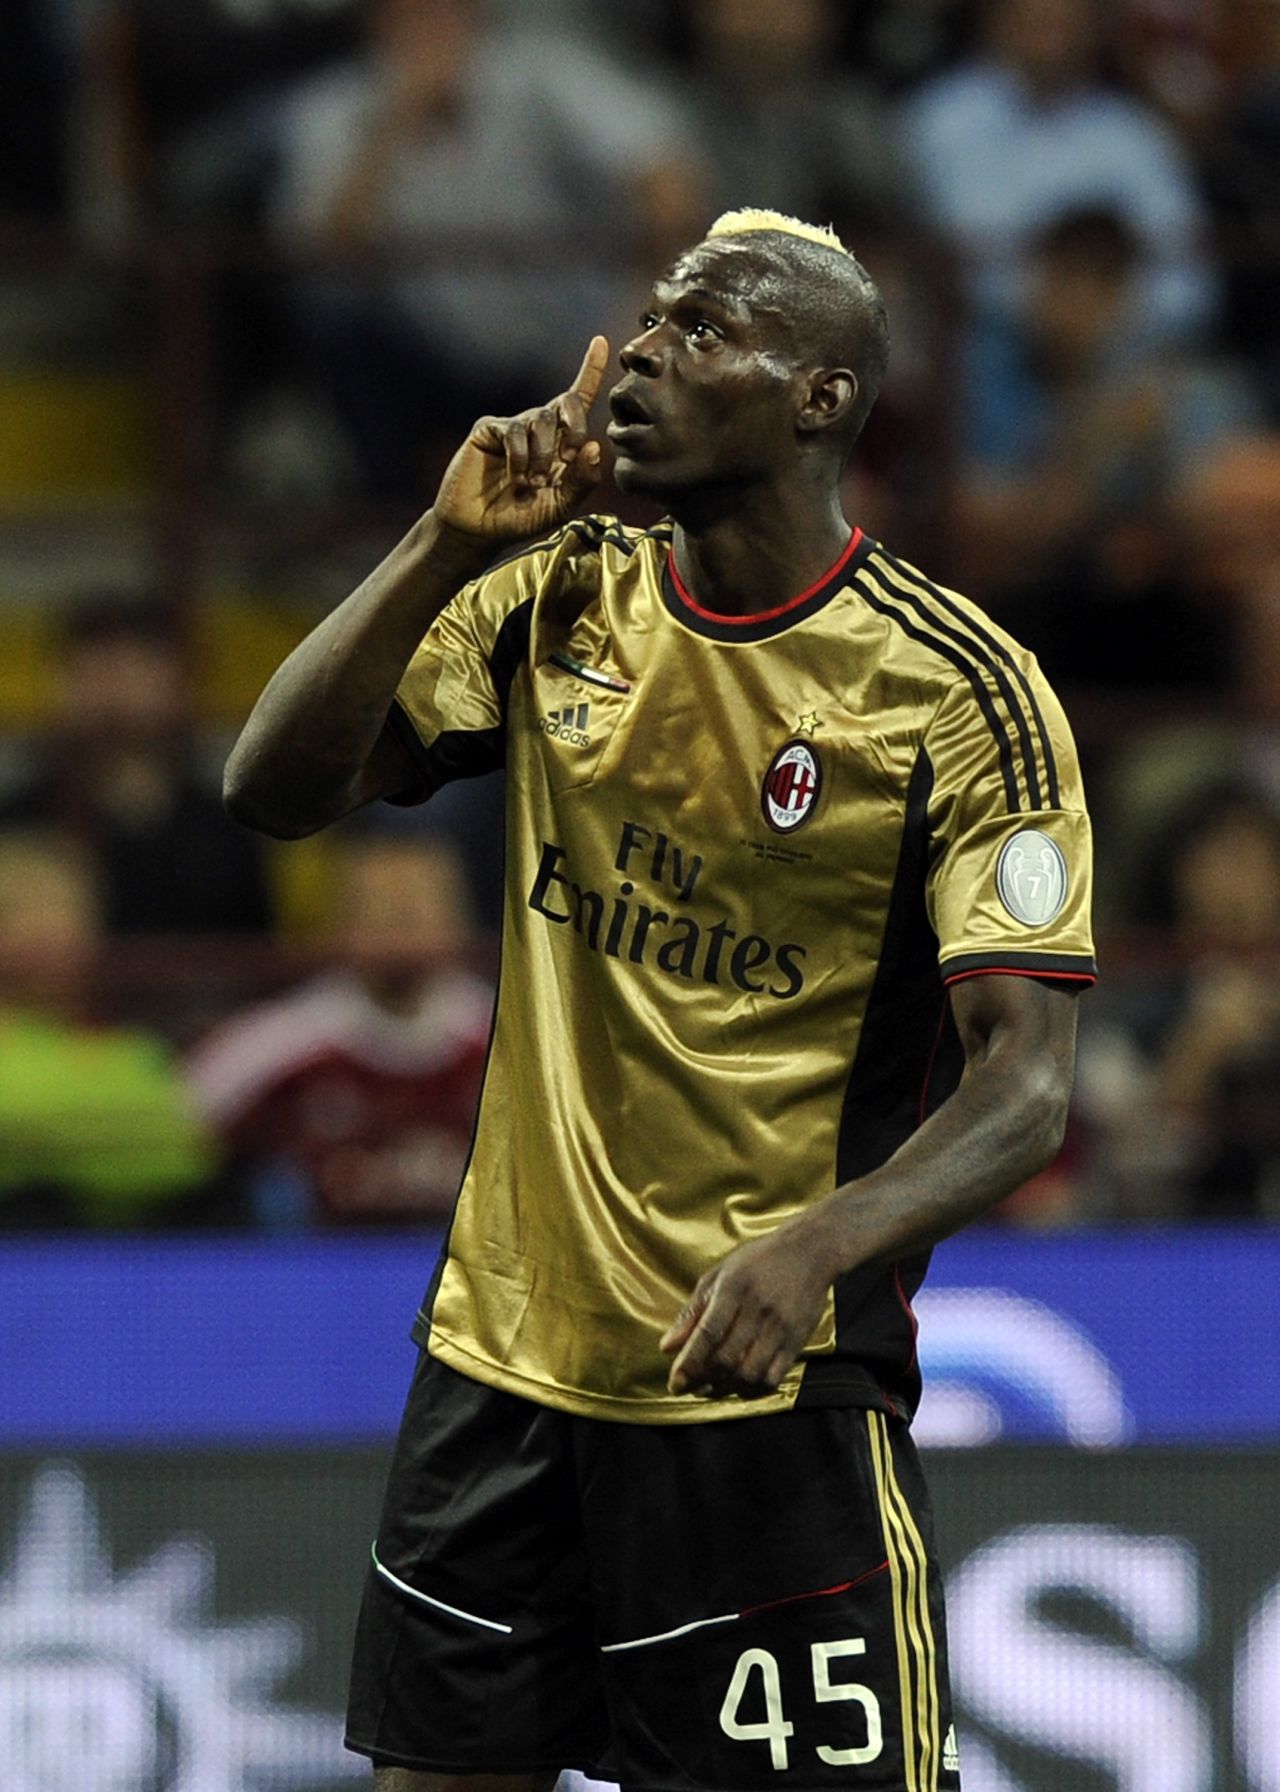 soccer match stopped due to racist abuse of Milan's Balotelli | CNN